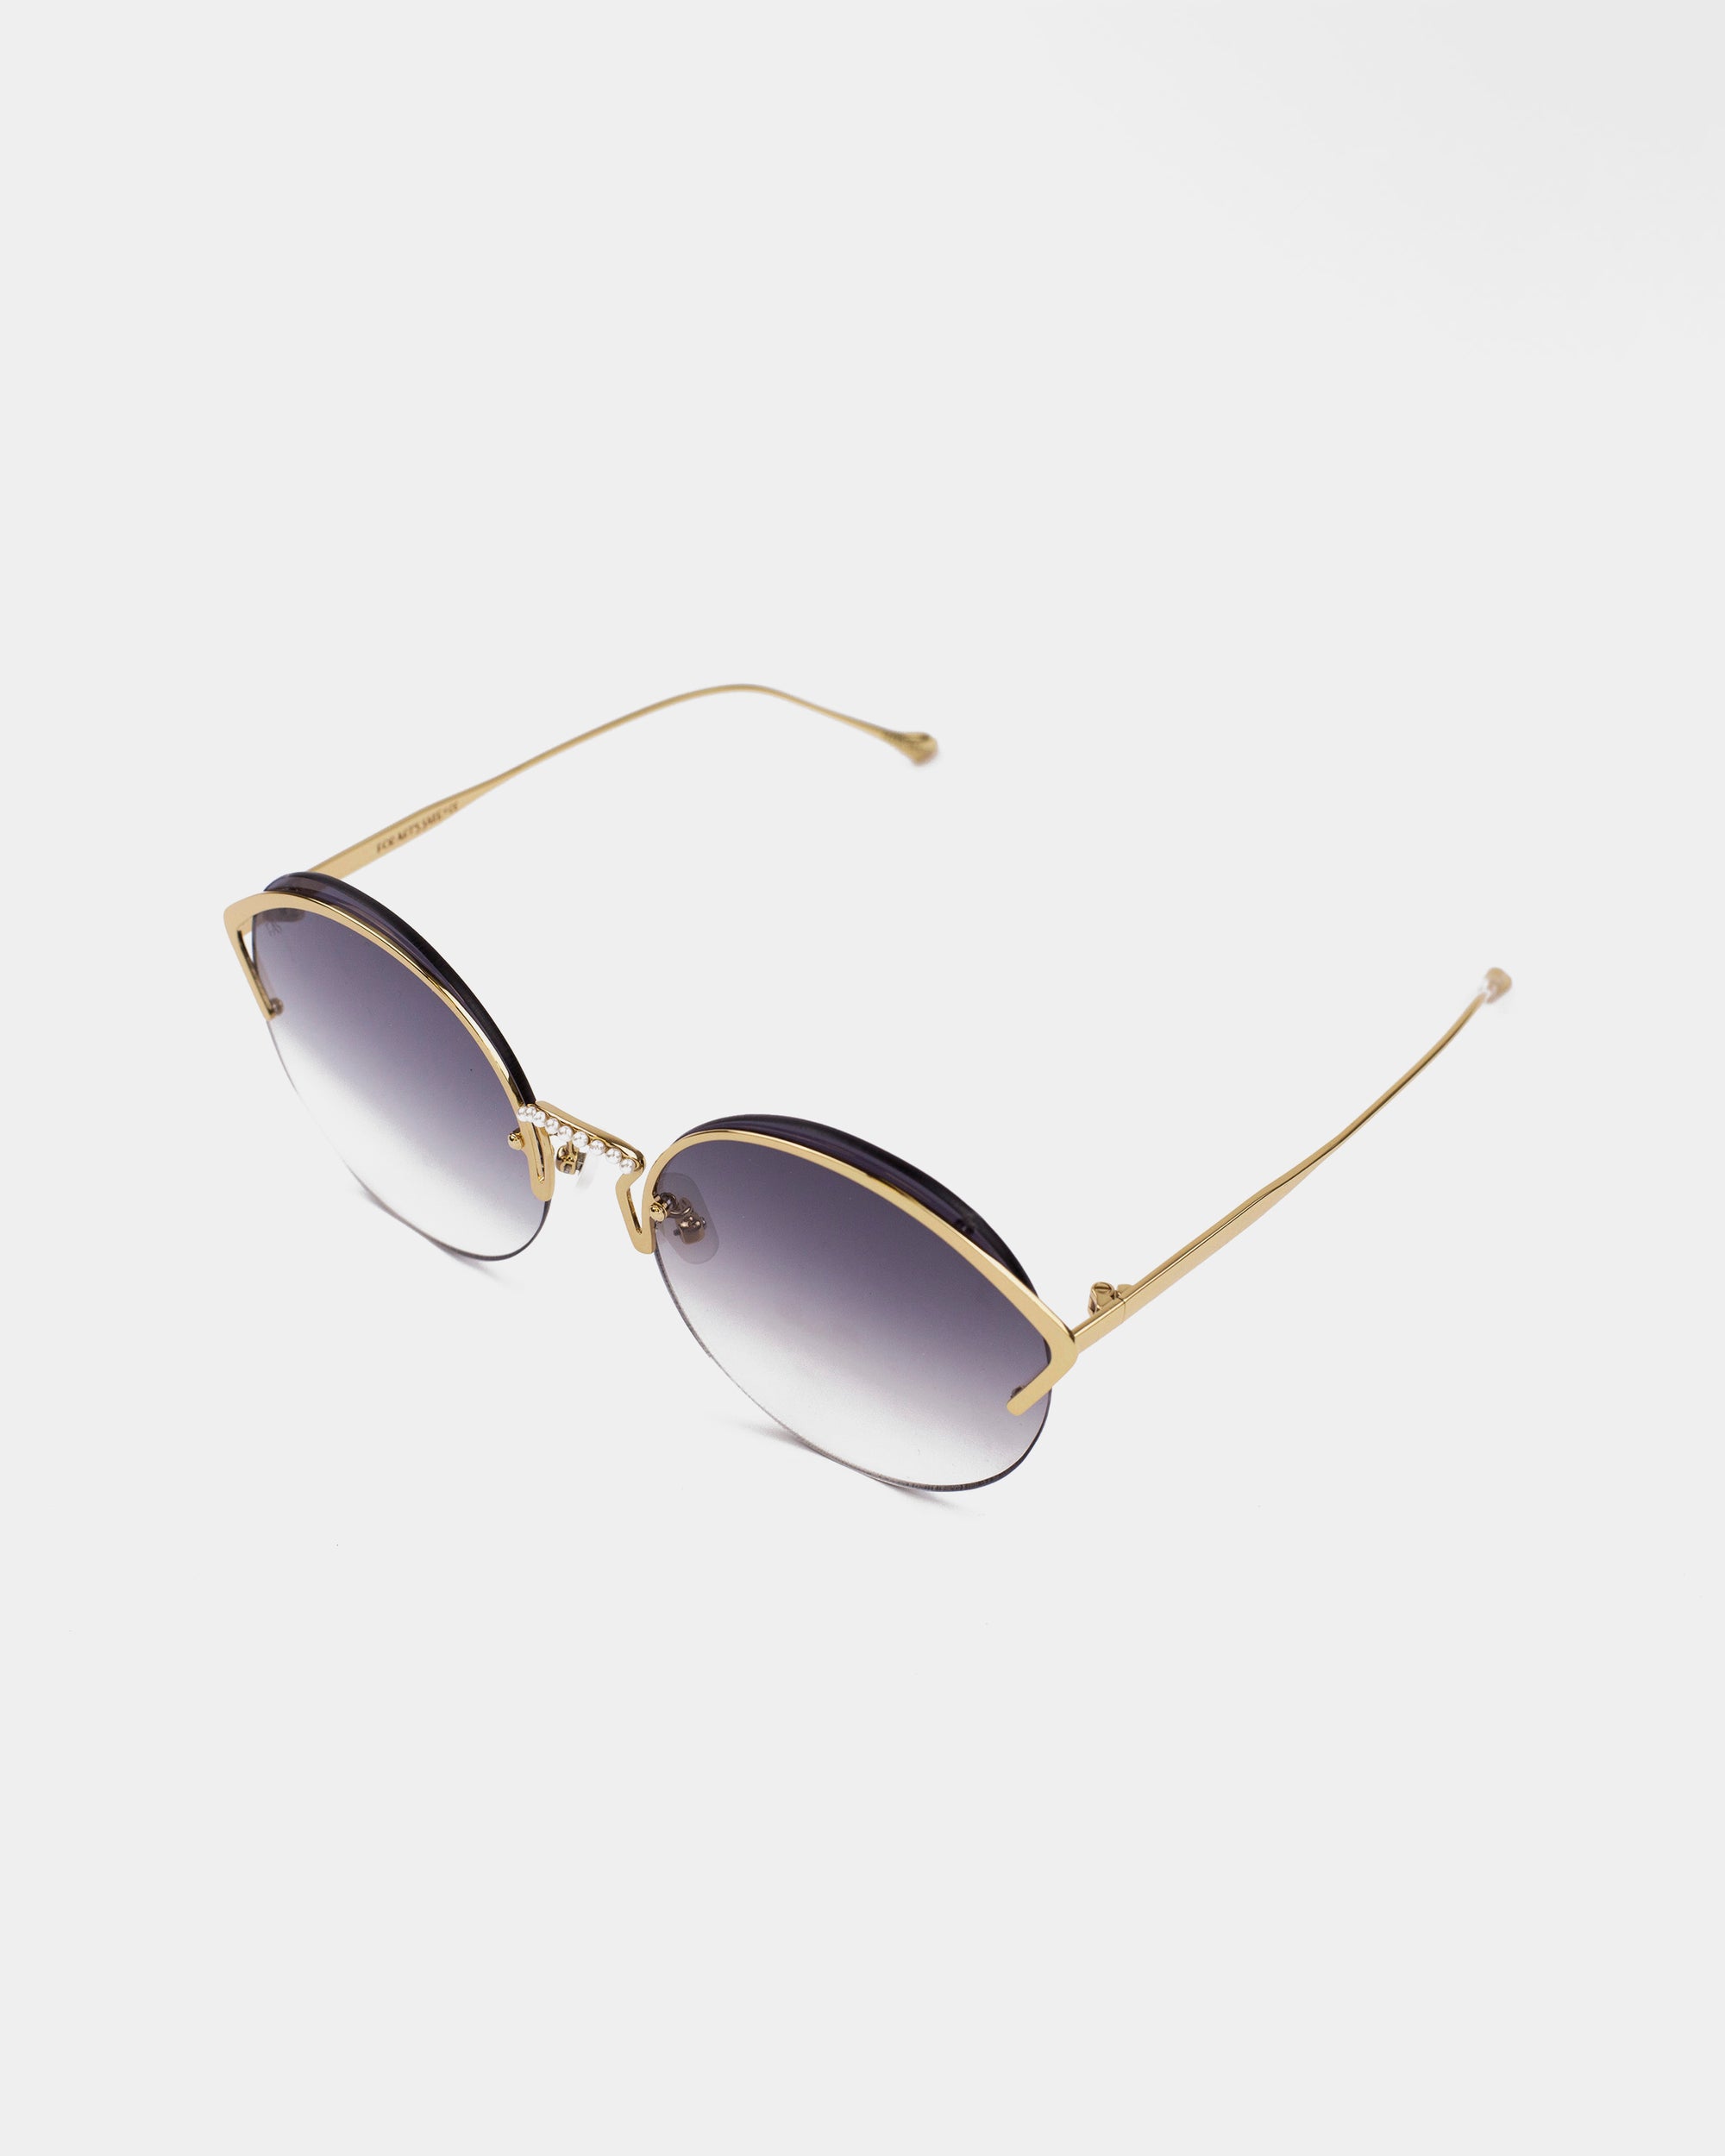 A pair of stylish round sunglasses with gradient nylon lenses and thin gold, stainless steel frames. The glasses are set against a plain white background, showcasing their elegant design, UV protection, and slim metal temples with small end tips. These are the Margarita sunglasses by For Art's Sake®.